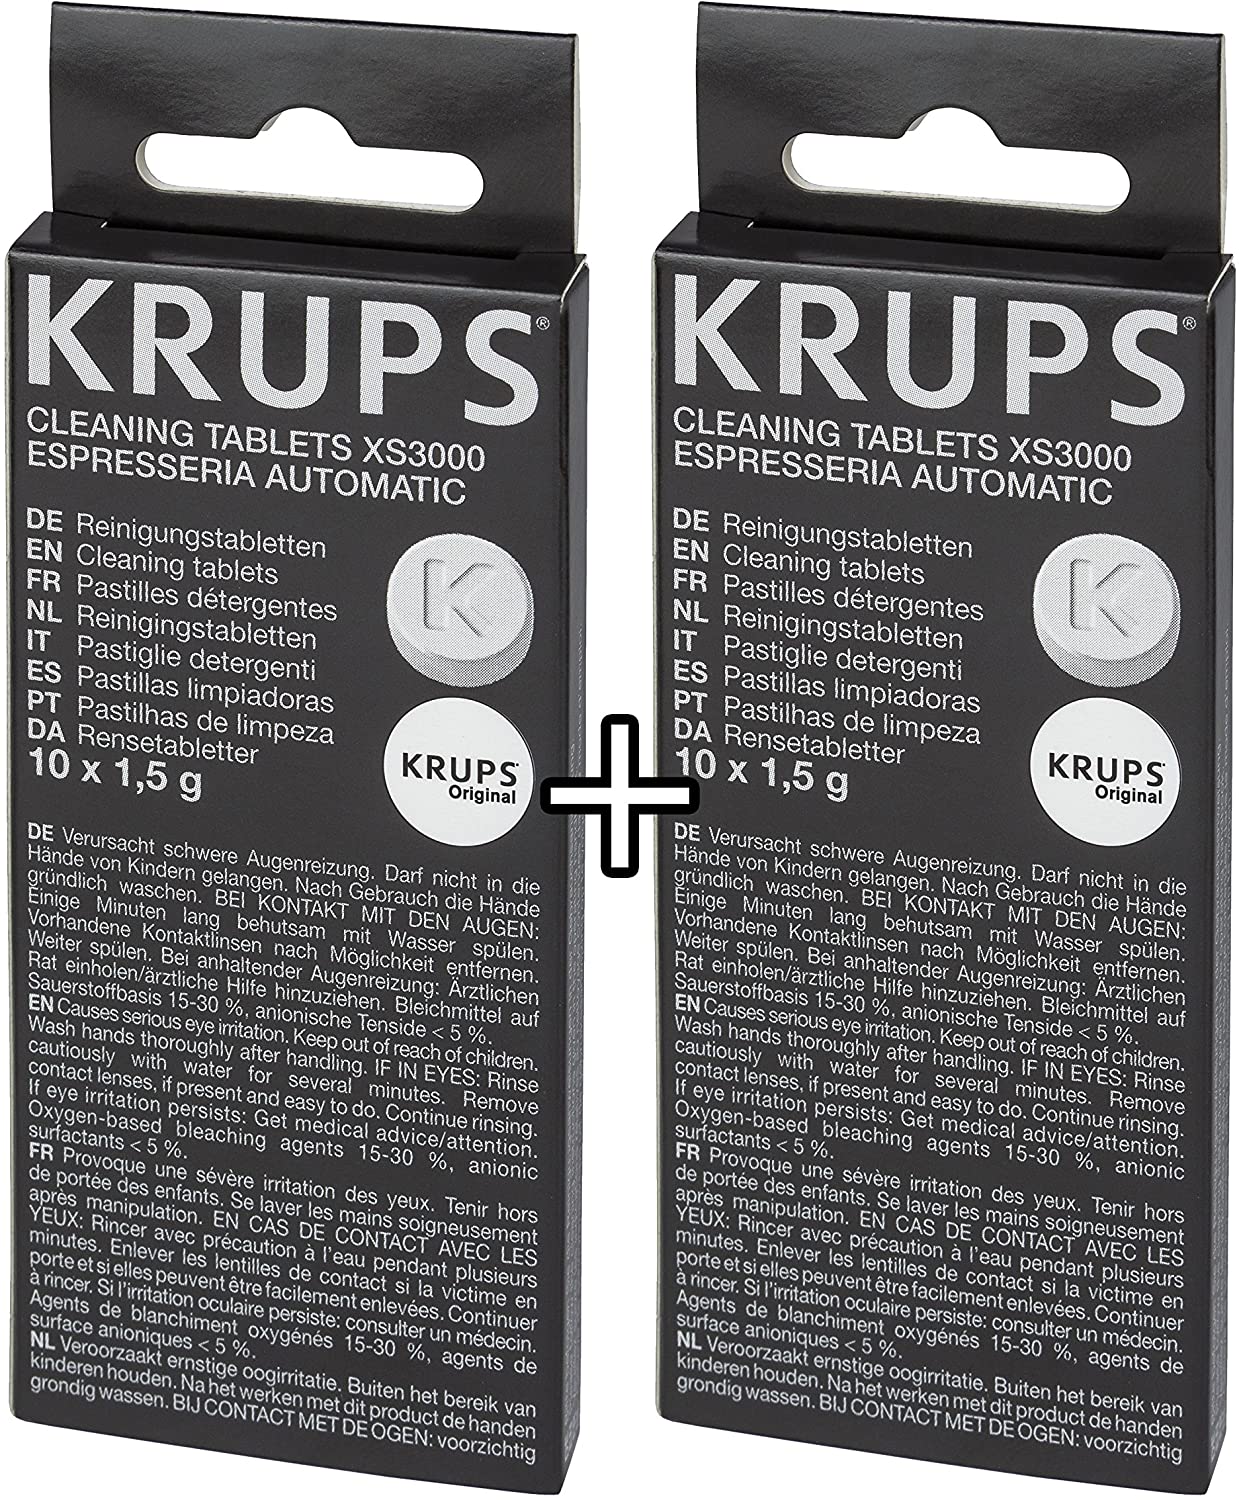 Krups XS3000 cleaning tablets (pack of 2)